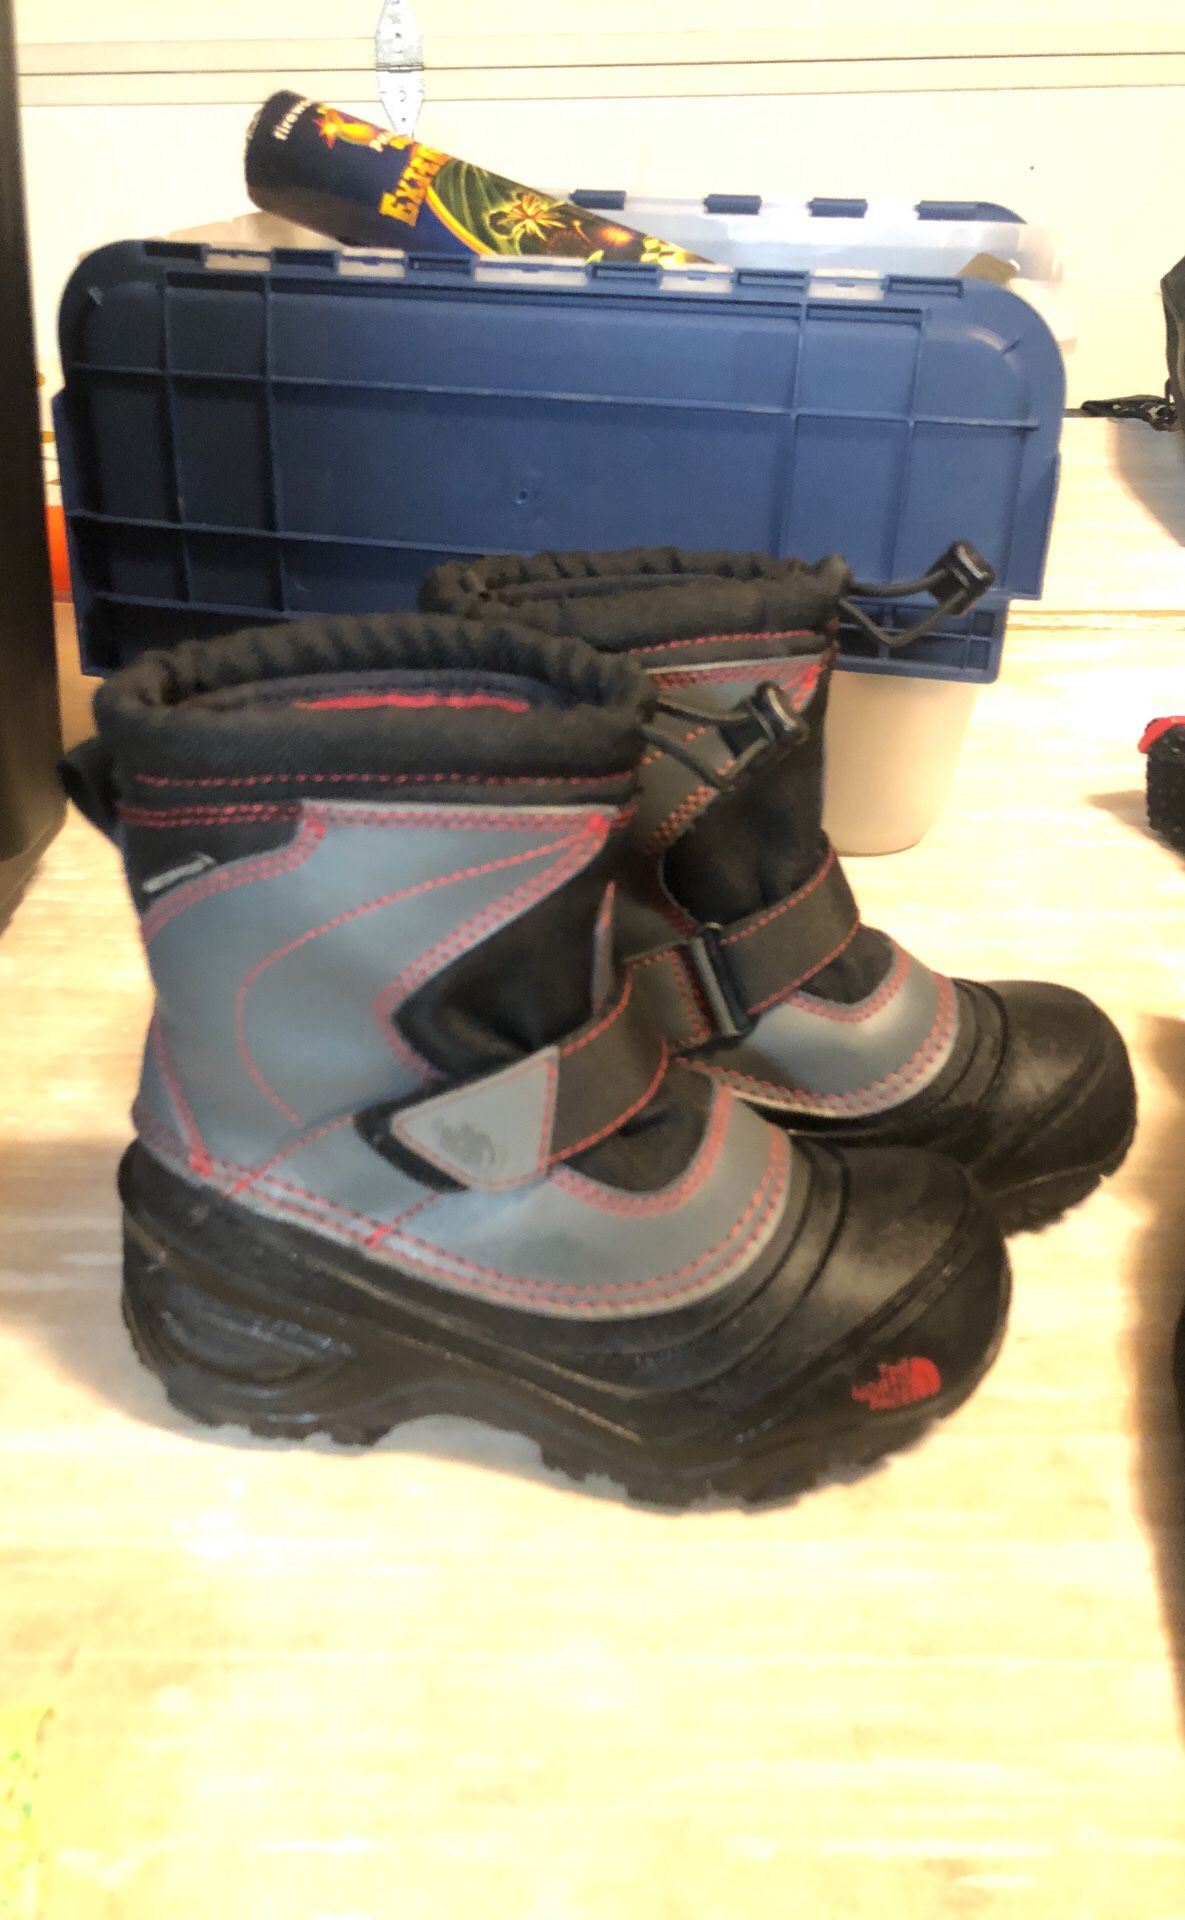 North Face snow boots for kids